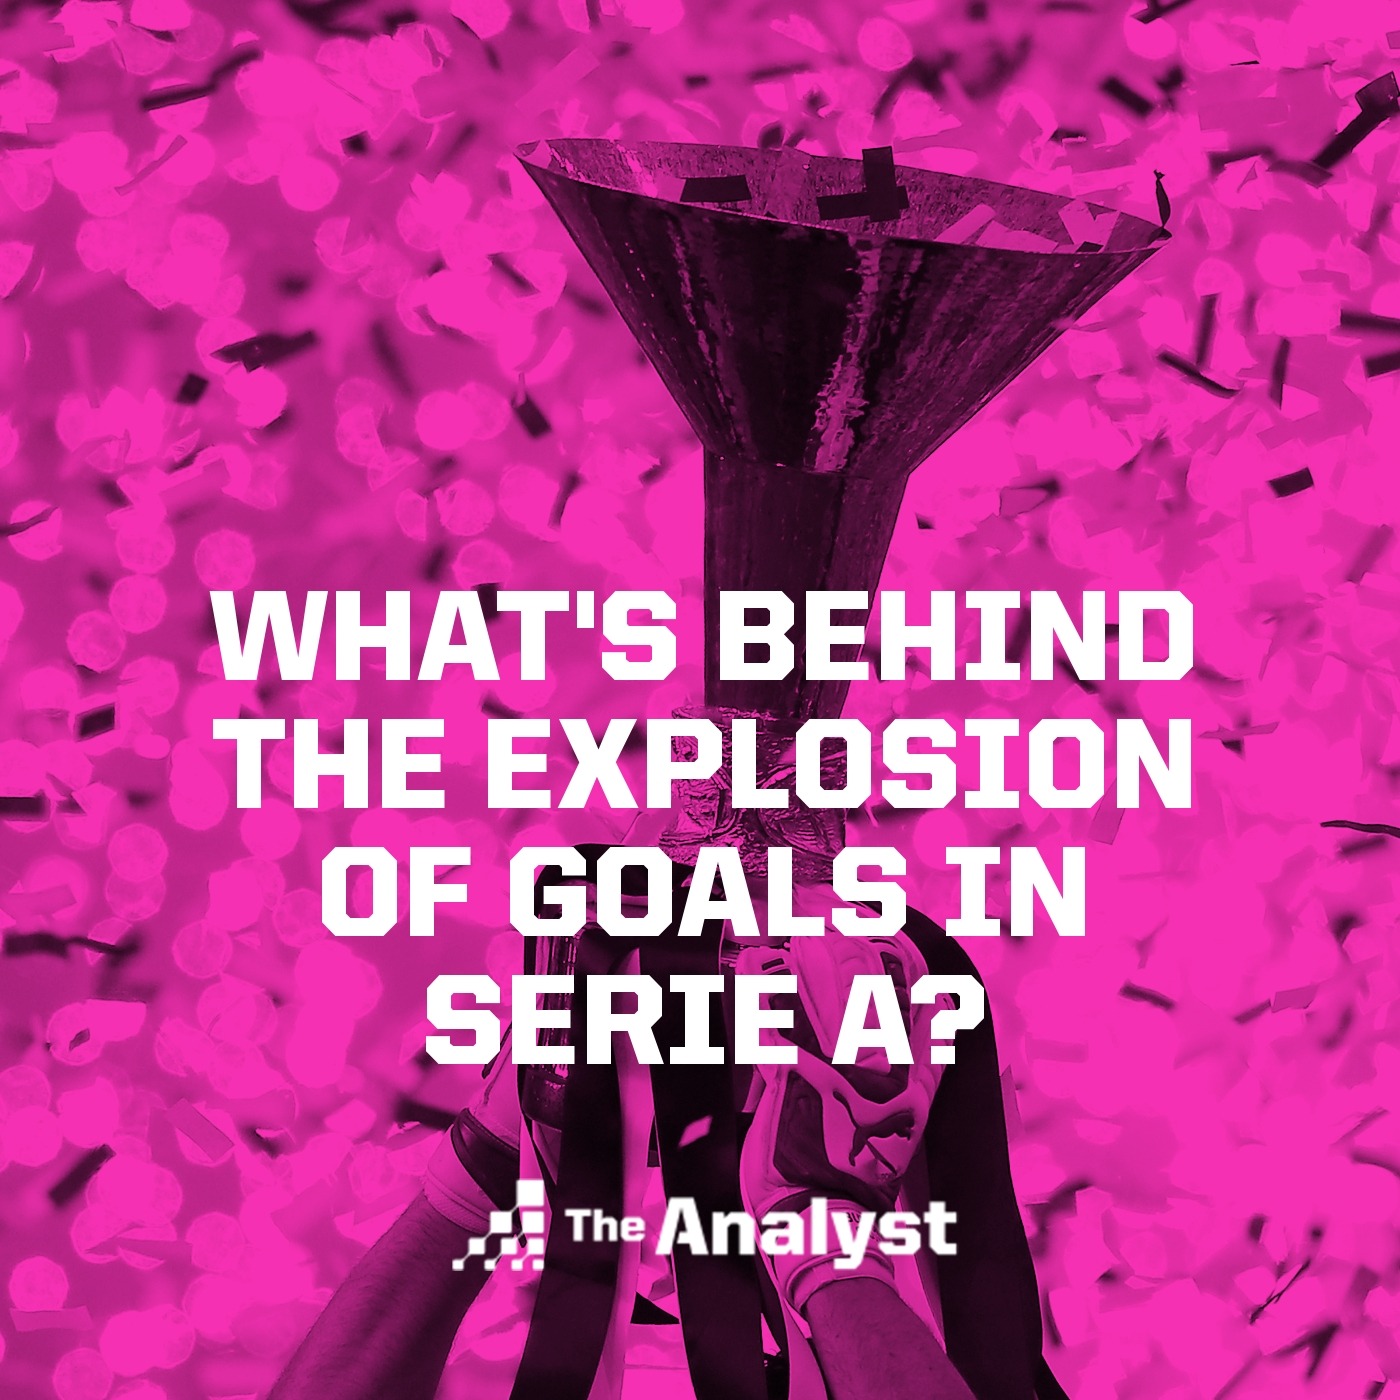 What's Behind the Explosion of Goals in Serie A?